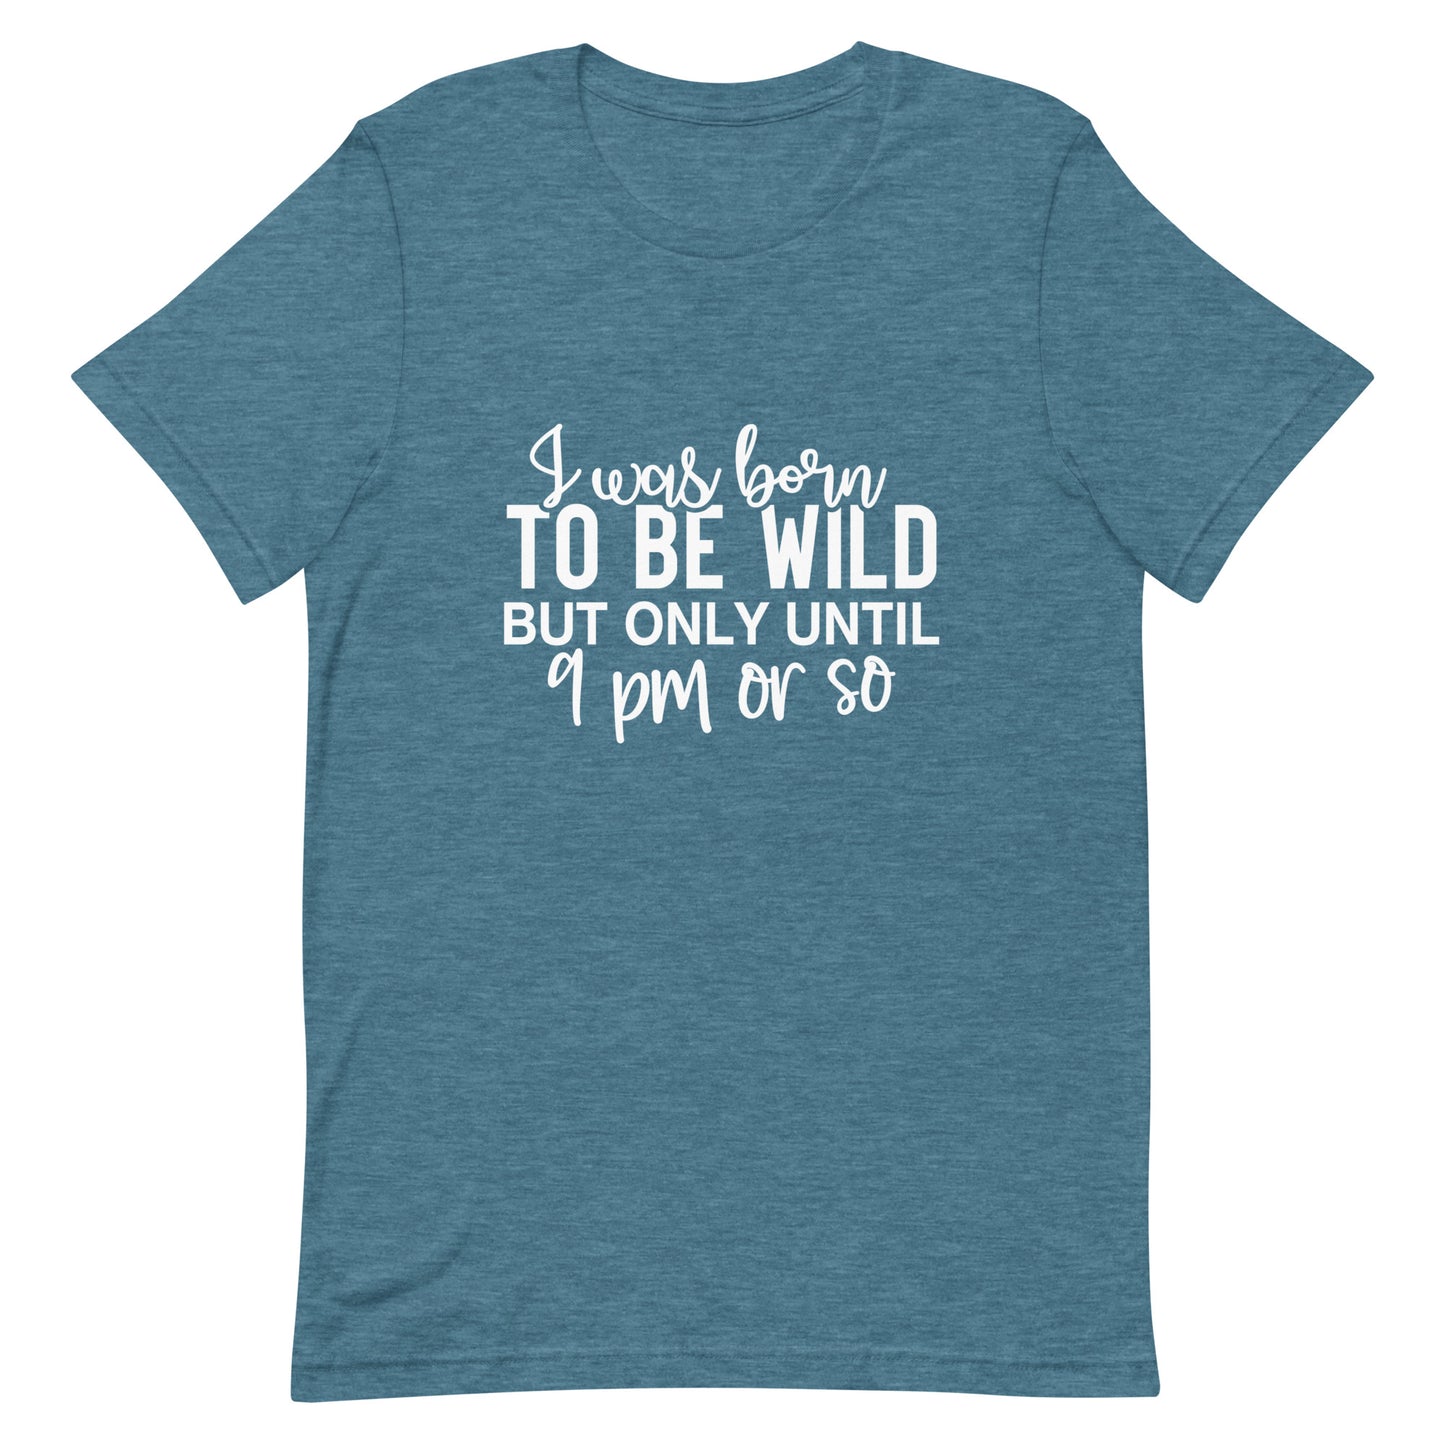 I Was Born to be Wild but Only Until 9PM or So Unisex t-shirt